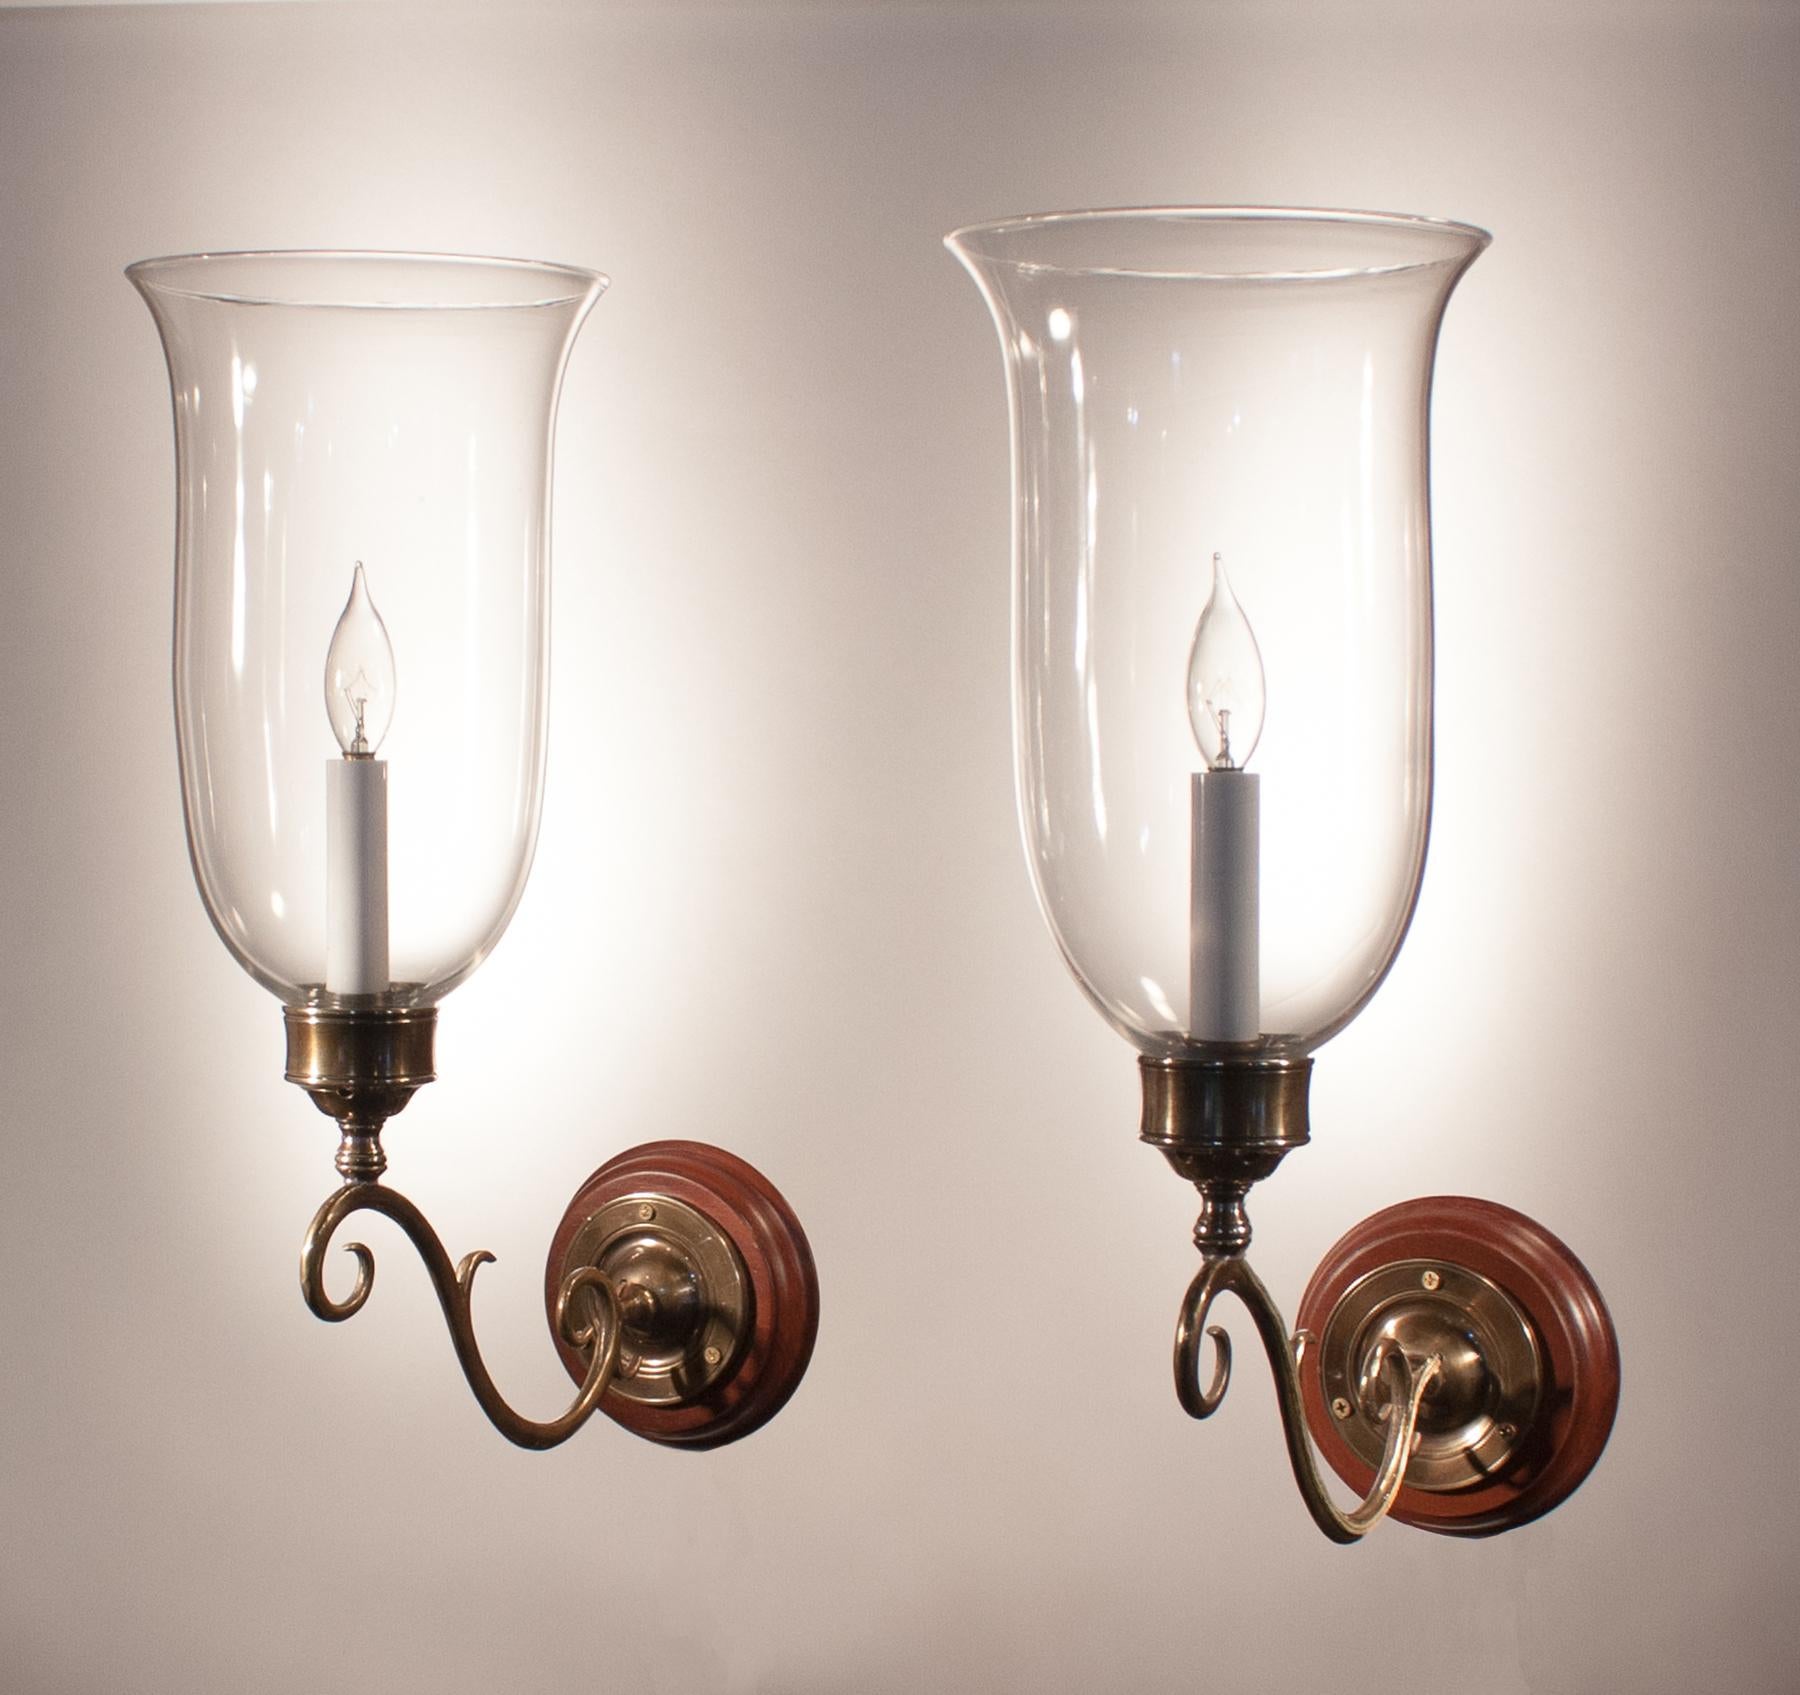 Pair of superb quality hand blown glass hurricane shades from England, circa 1890. These flared shades have classic form, and their proportion is well-suited to the scroll brass sconce arms. The custom-fabricated sconce arms and mahogany backplates